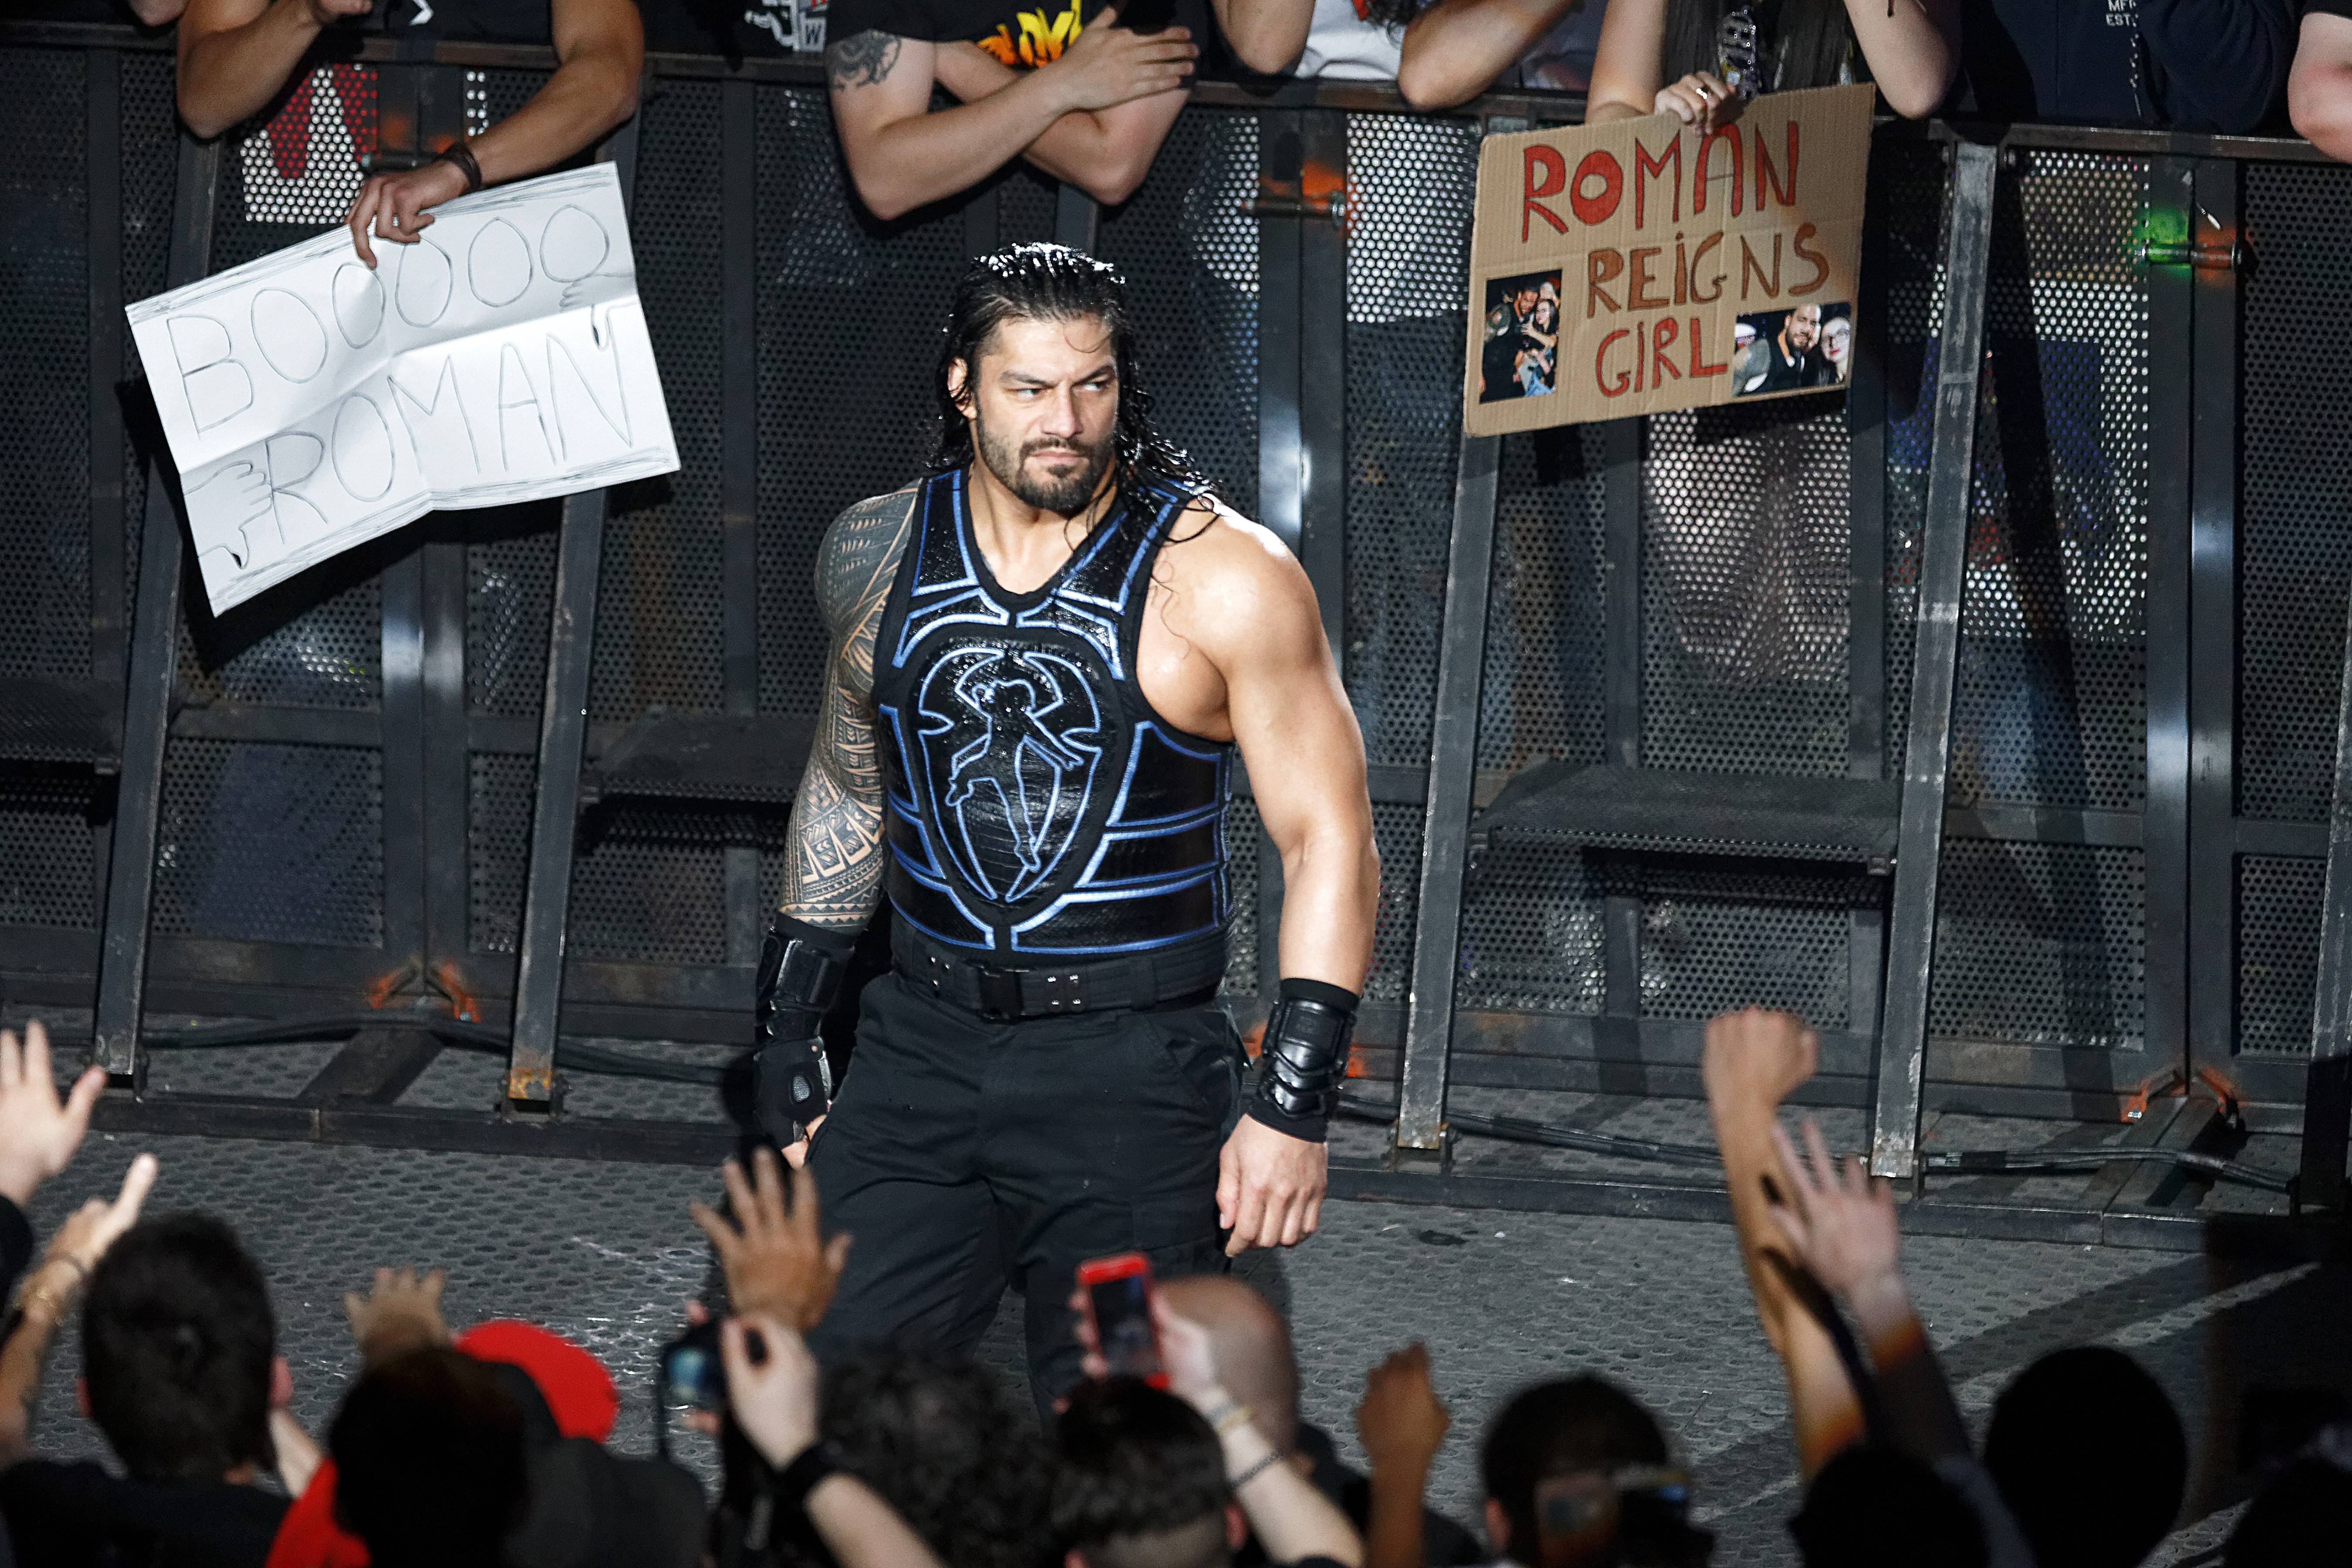 WWE star Roman Reigns announces his cancer is in remission